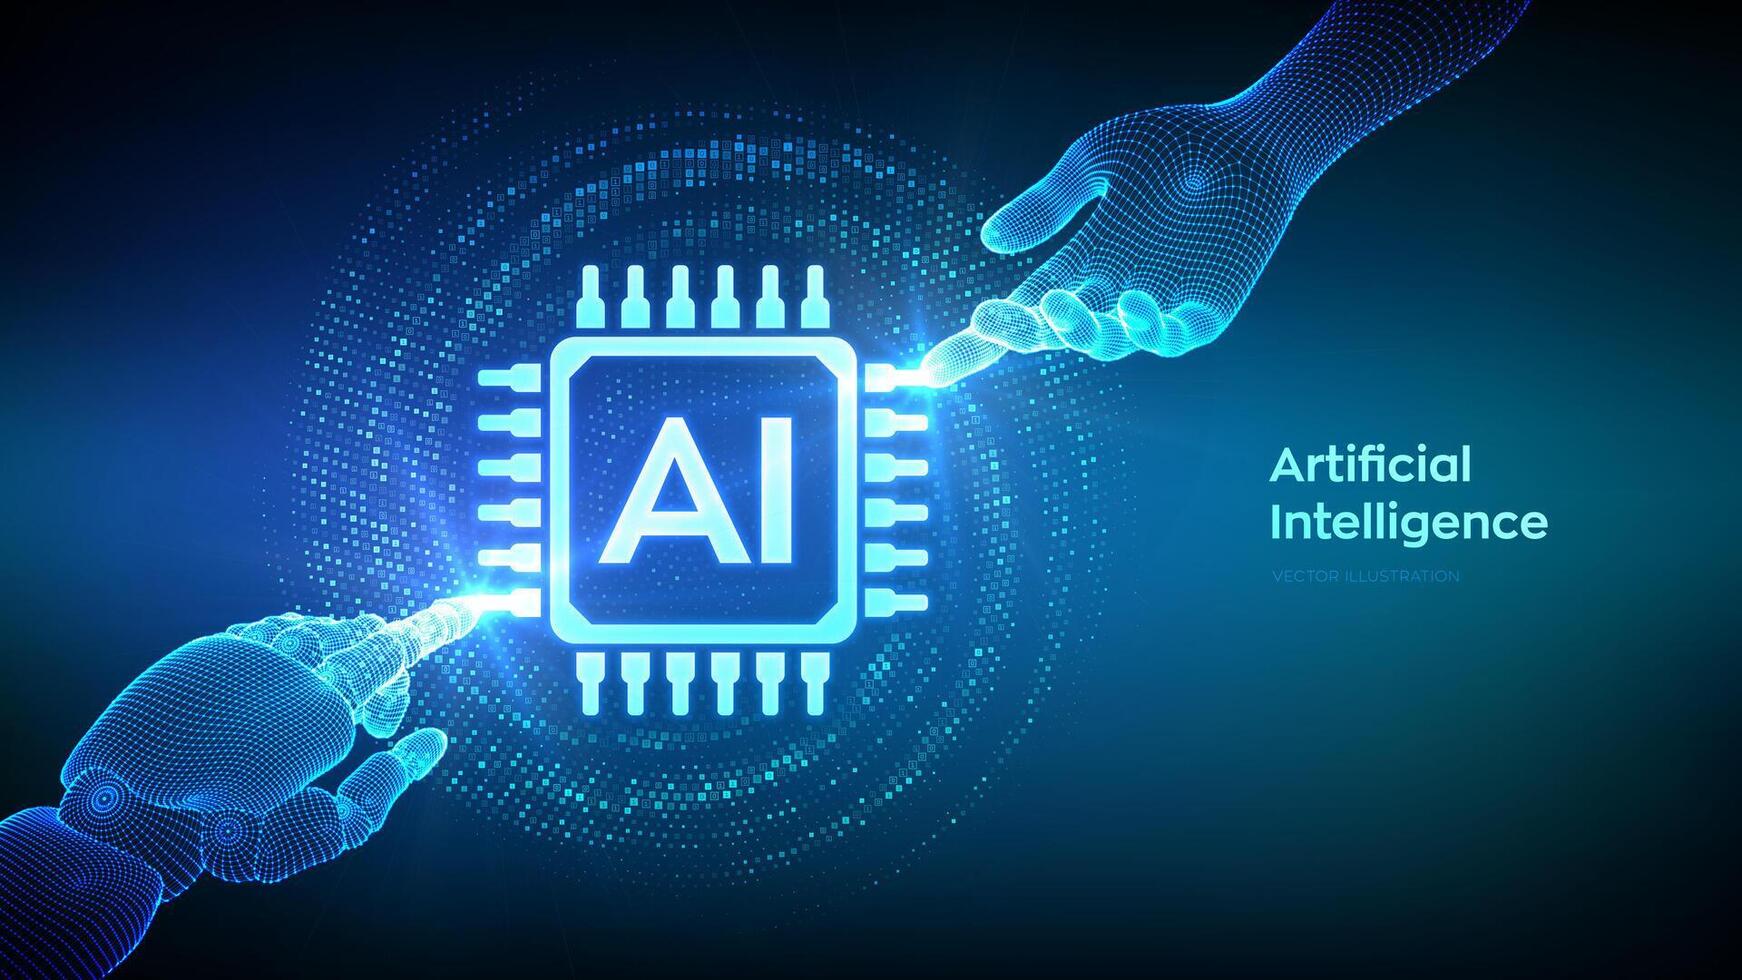 AI. Artificial Intelligence. Hands of Robot and Human touching Artificial Intelligence icon with binary code. Machine Learning technology concept. Neural networks. Vector illustration.